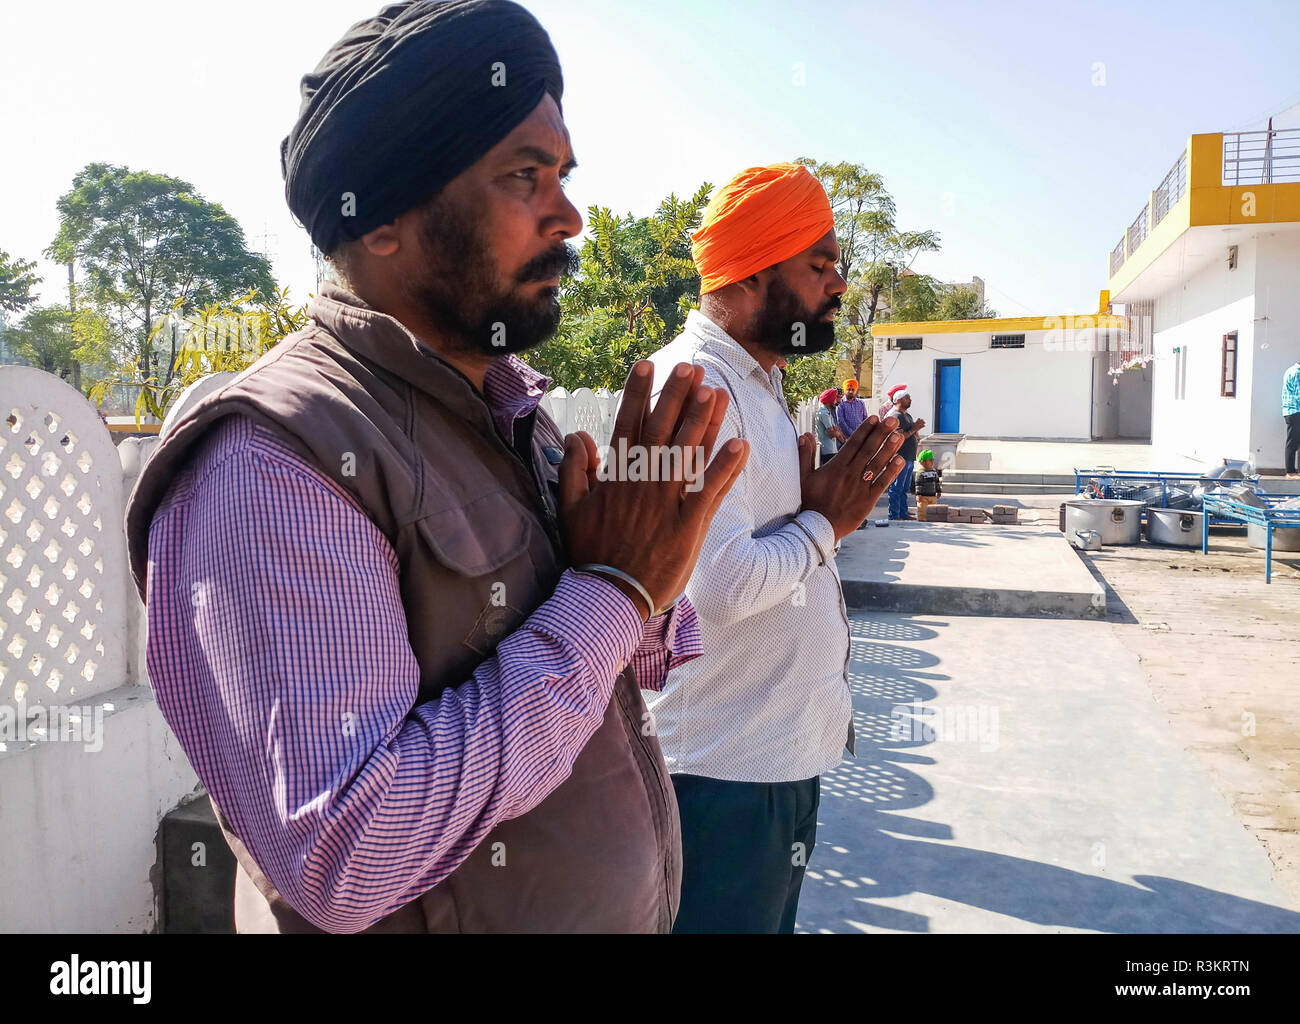 Mohali, Punjab, India. 23rd Nov, 2018. Sikh devotees are seen praying outside Gurdwara or a Sikh temple during the occasion of the 550th birth anniversary of Guru Nanak Dev in Mohali.Sikhism was founded in the 15th century by Guru Nanak, who broke away from Hinduism, India's dominant religion, He preached the equality of races and genders and the rejection of image-worship and the caste system. Credit: Saqib Majeed/SOPA Images/ZUMA Wire/Alamy Live News Stock Photo